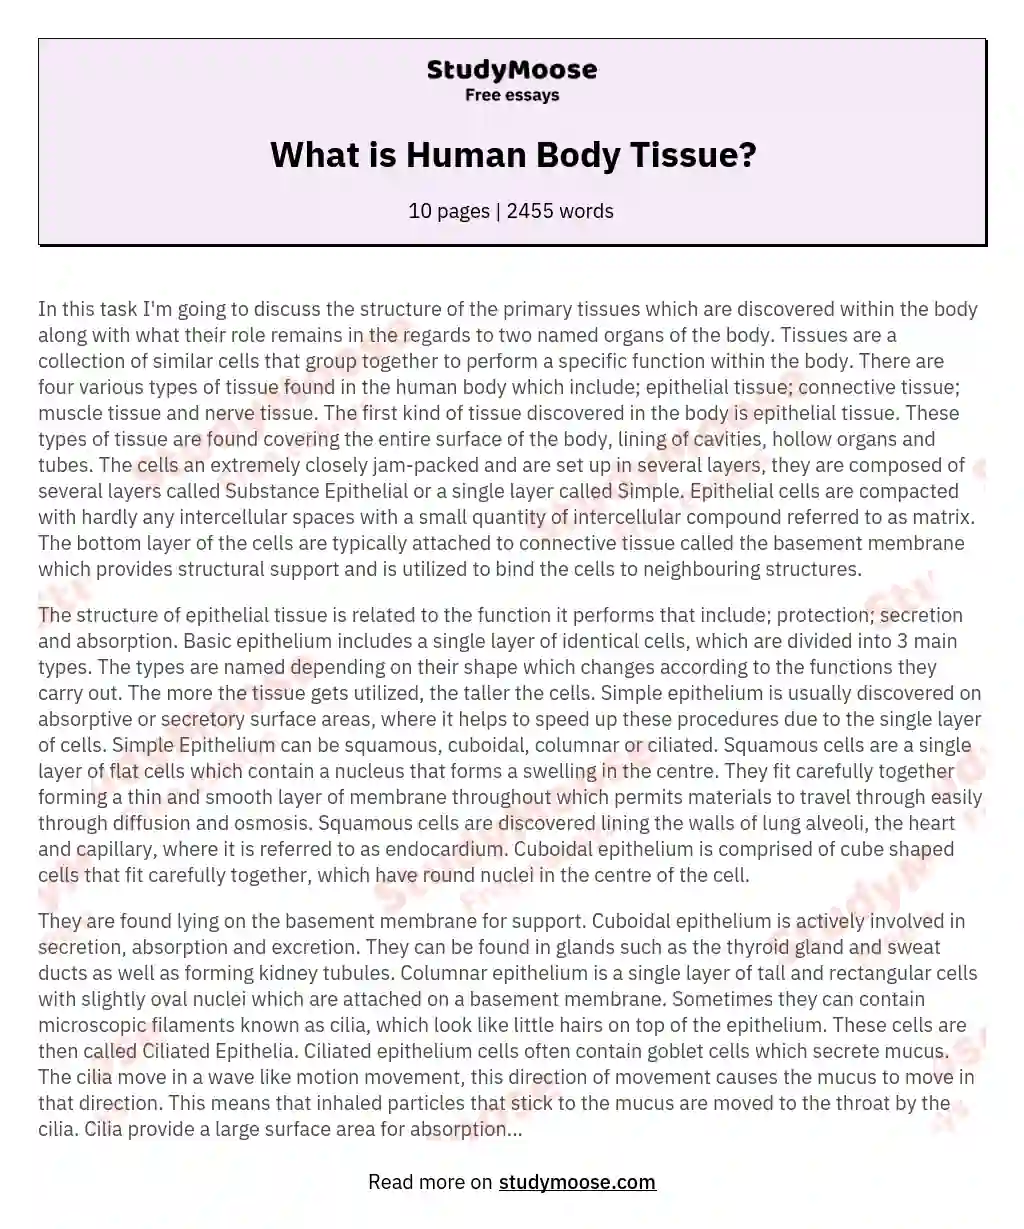 What is Human Body Tissue? essay